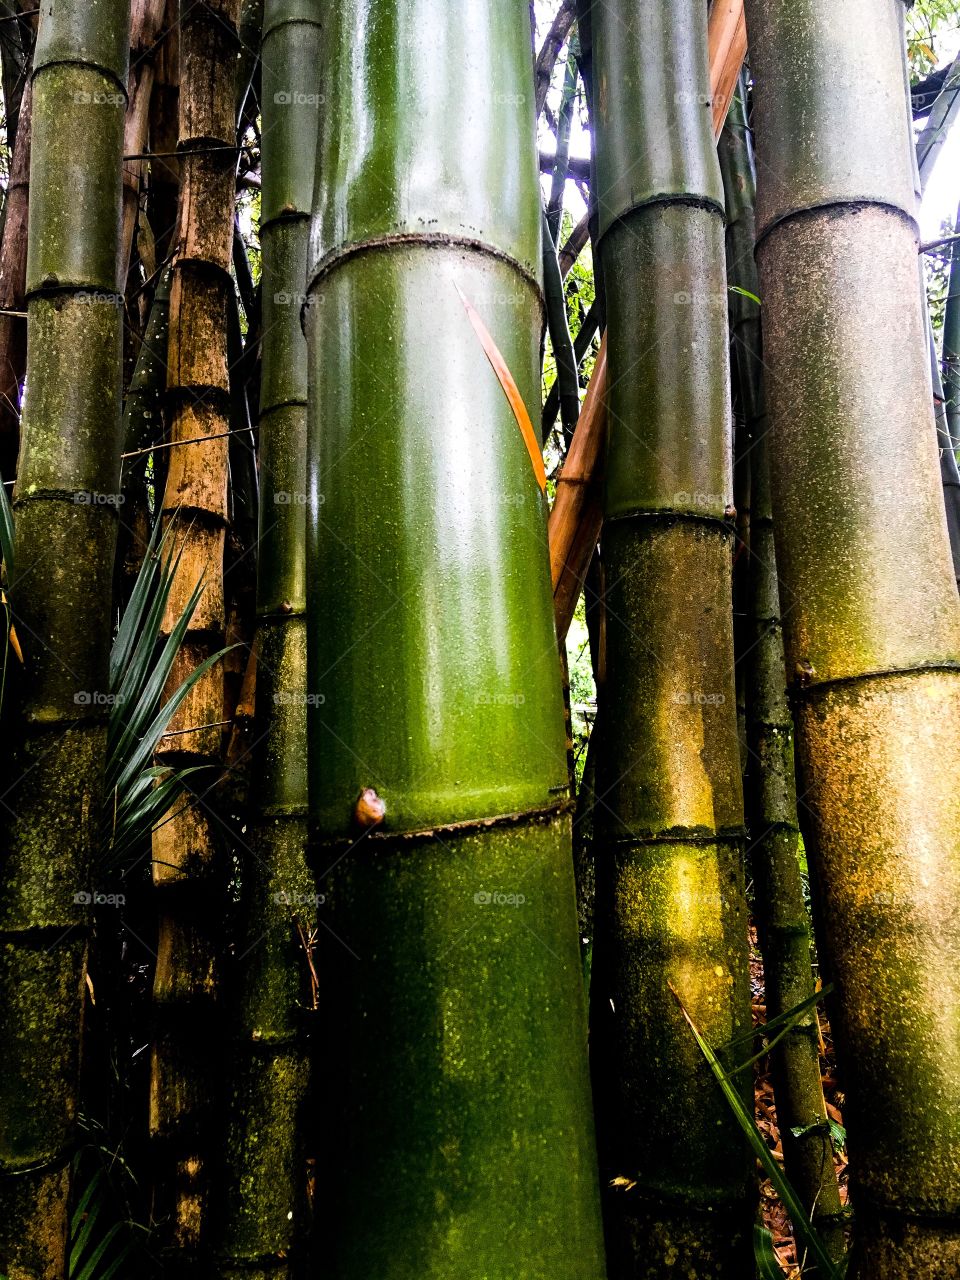 Bamboo forest in South Florida 